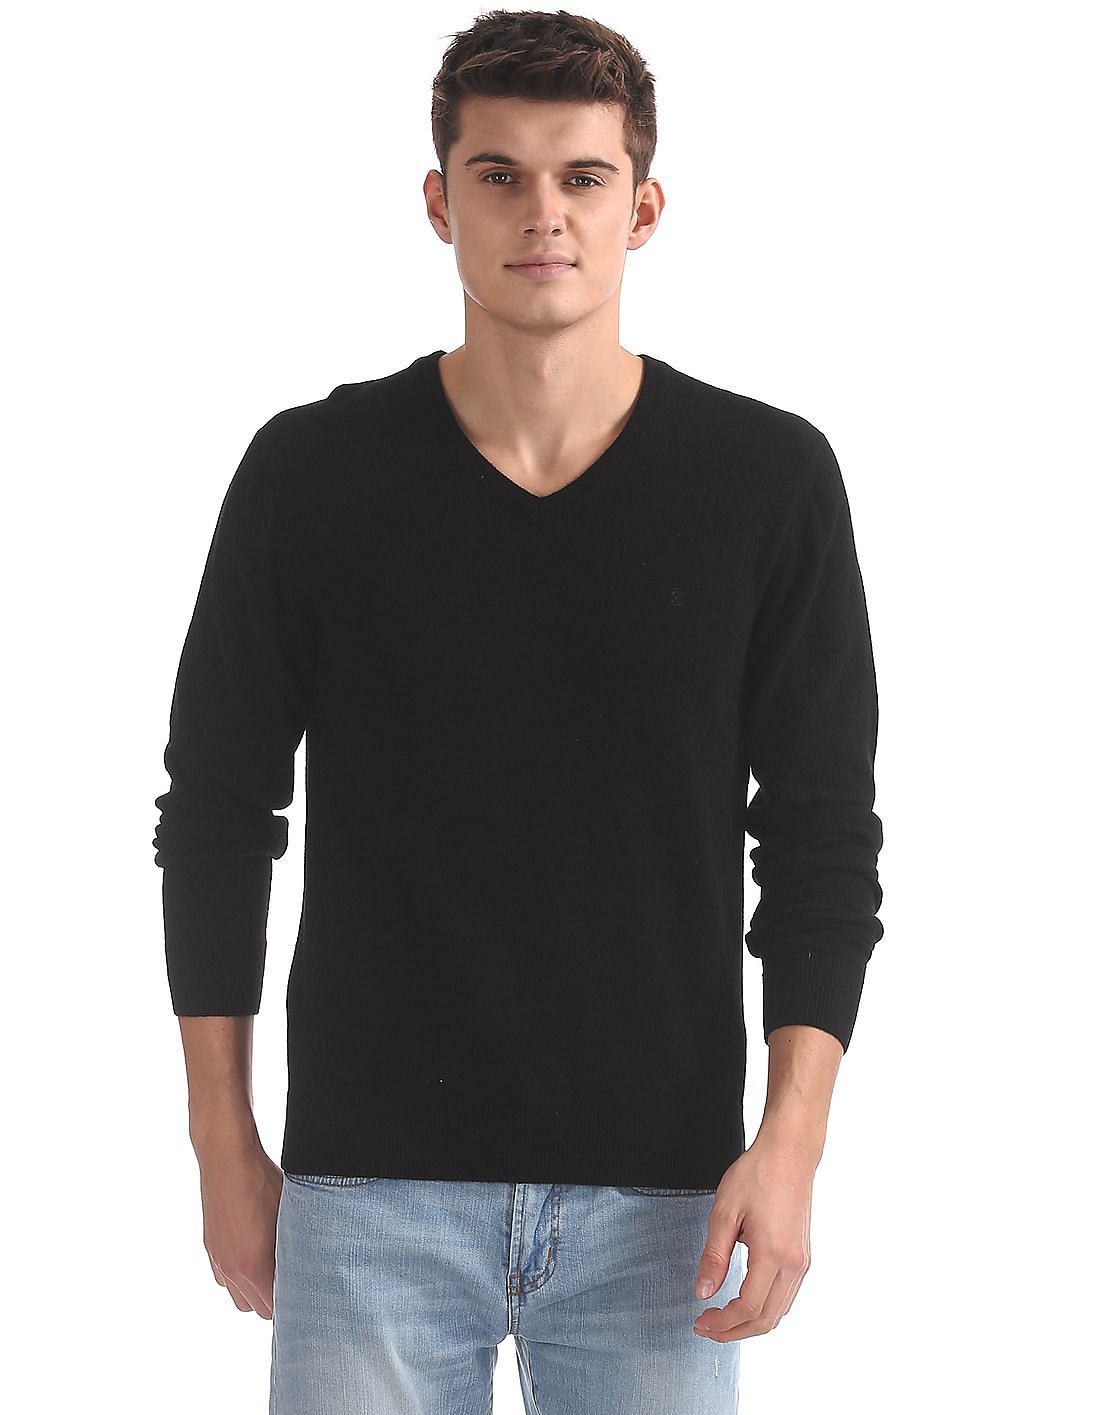 Buy Men Solid Long Sleeve Sweater online at NNNOW.com